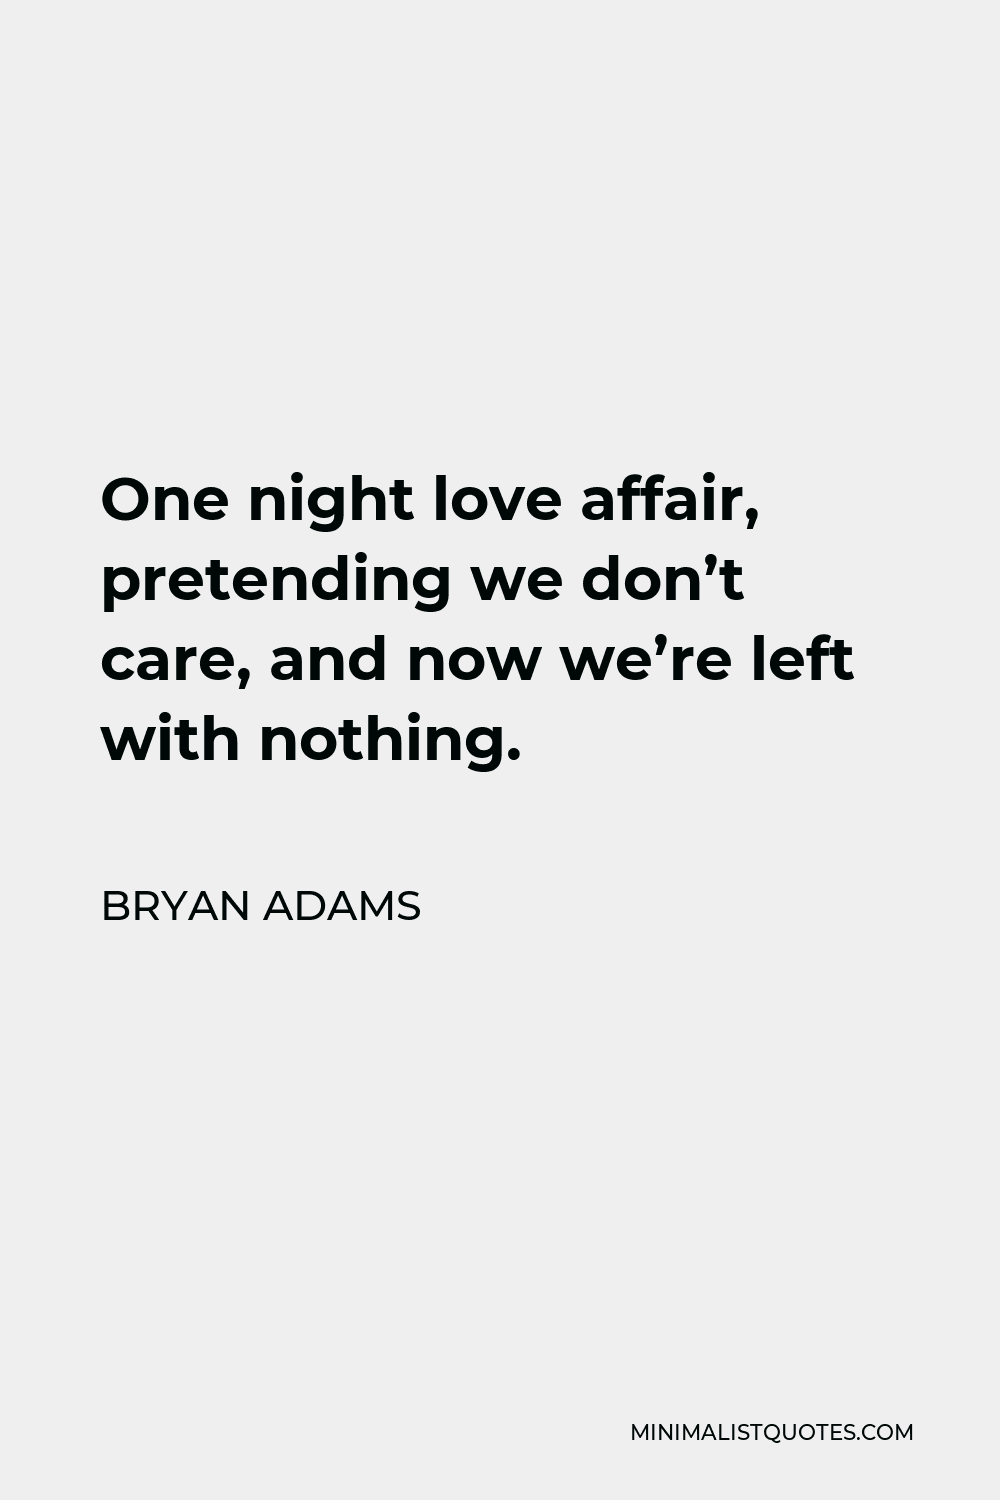 Bryan Adams Quote One Night Love Affair Pretending We Don T Care And Now We Re Left With Nothing